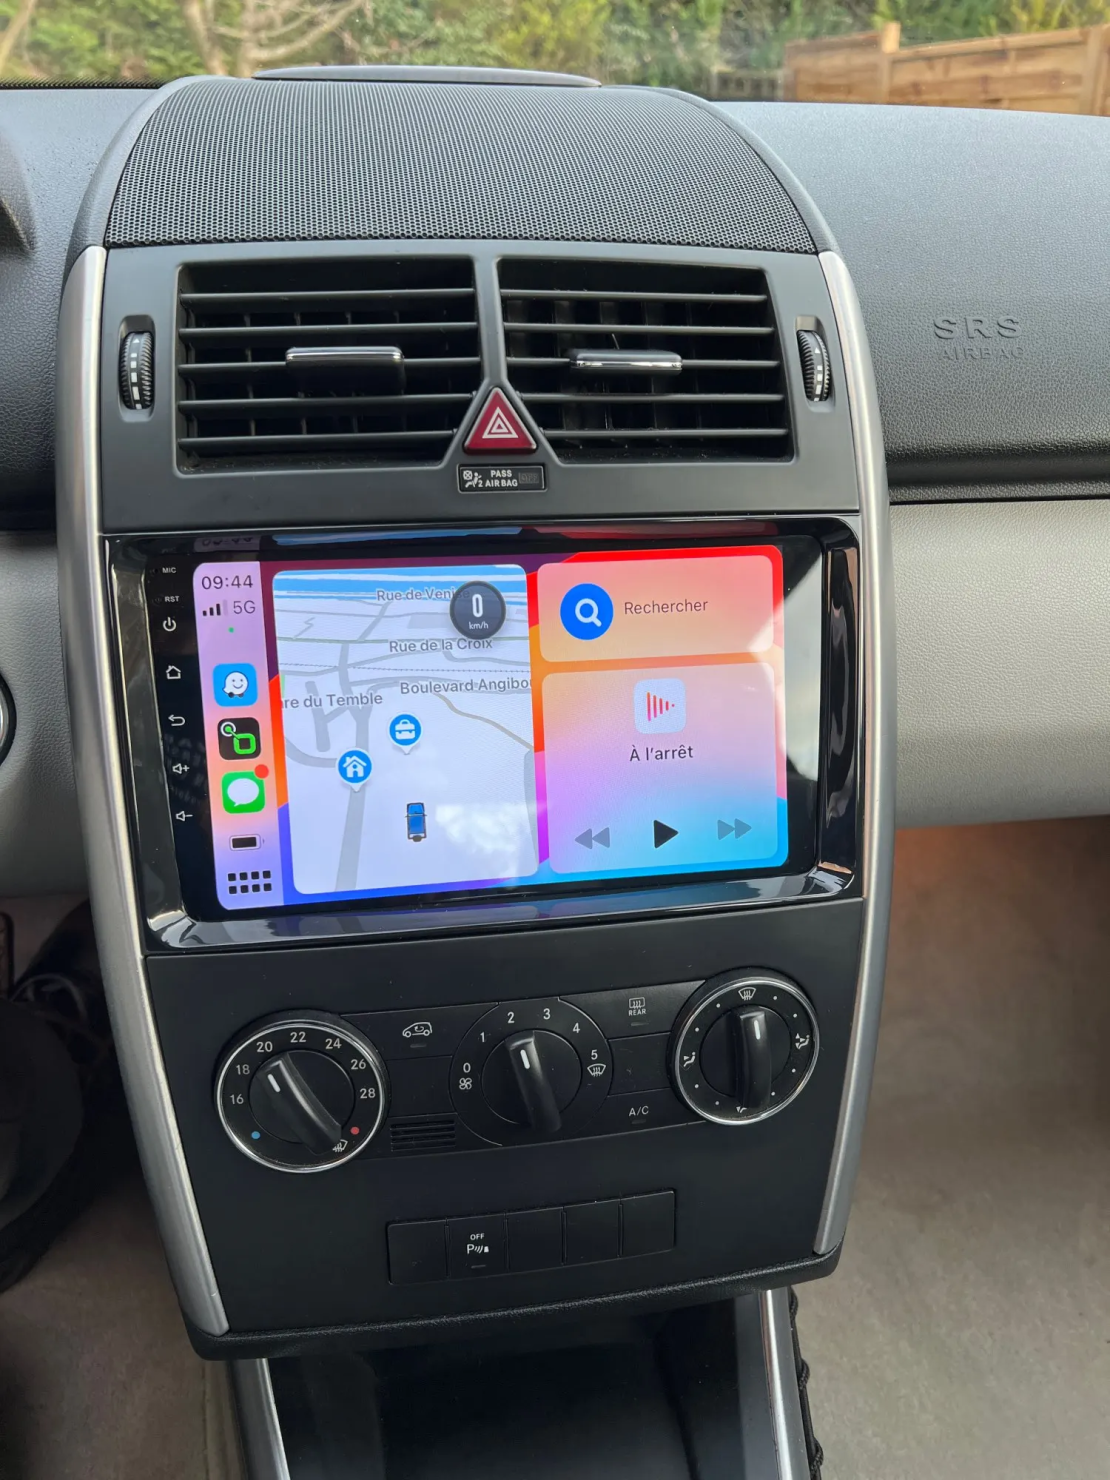 Mercedes Benz B CLASS W245 2005- 2011 Android Multimedia/Navigation